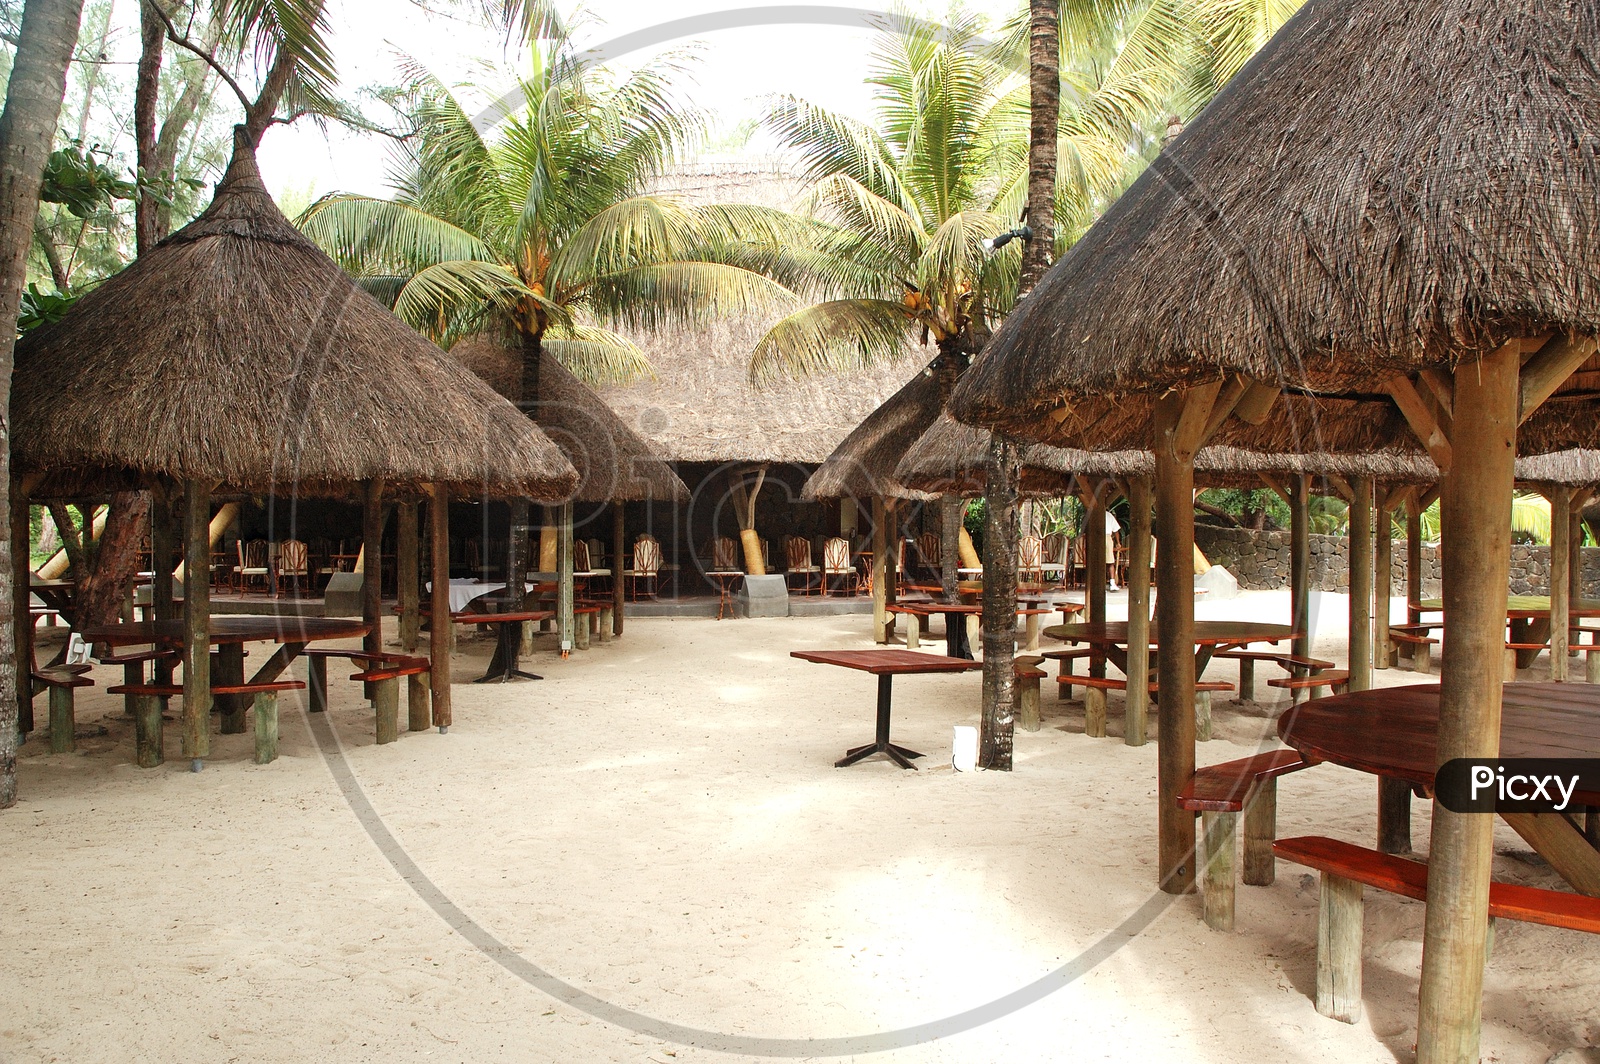 Huts in the resort by the beach